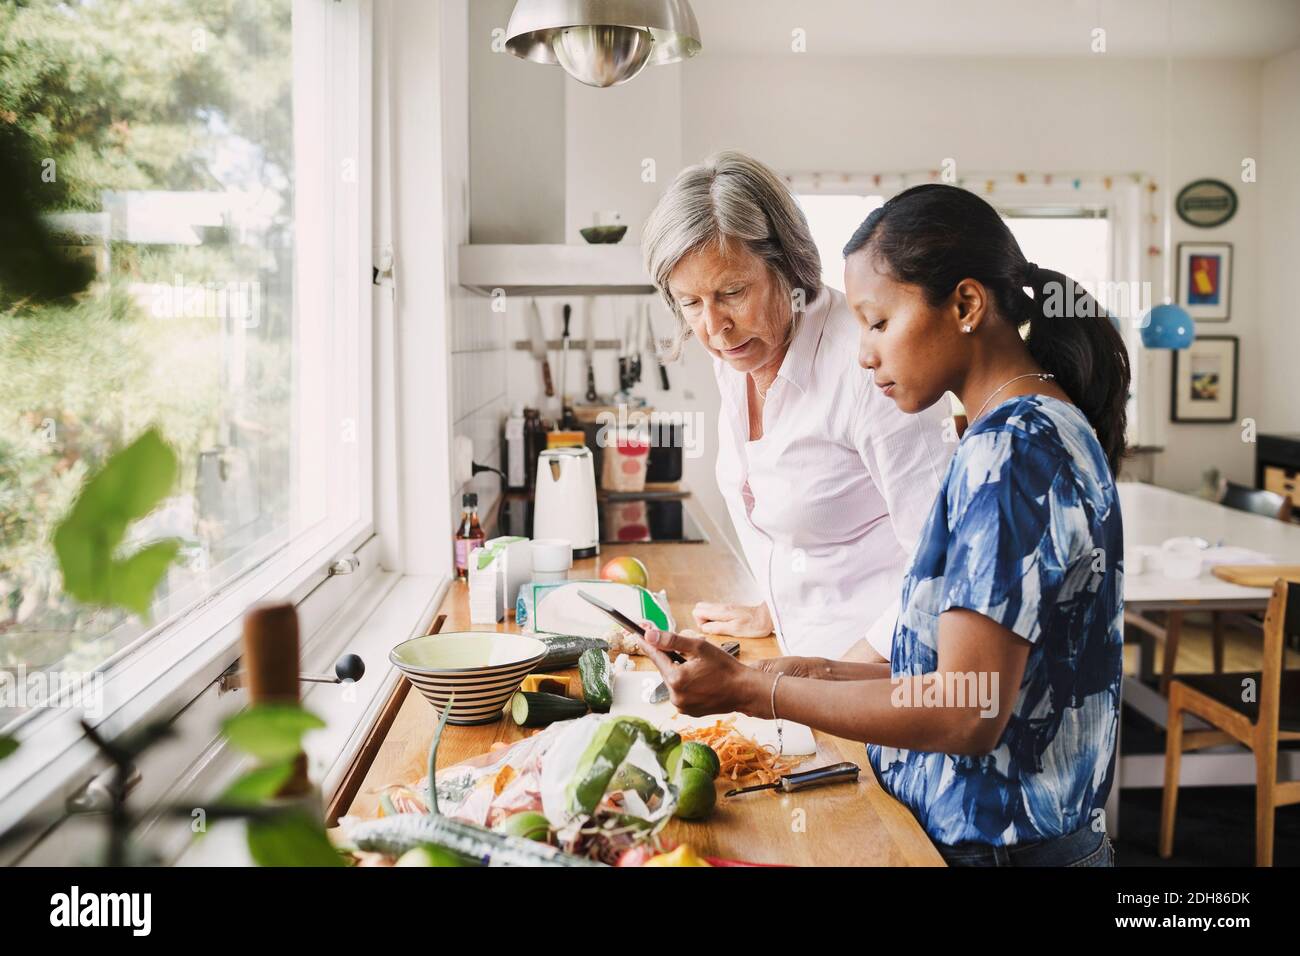 Senior woman using digital tablet with daughter-in-law while cooking food in kitchen Stock Photo